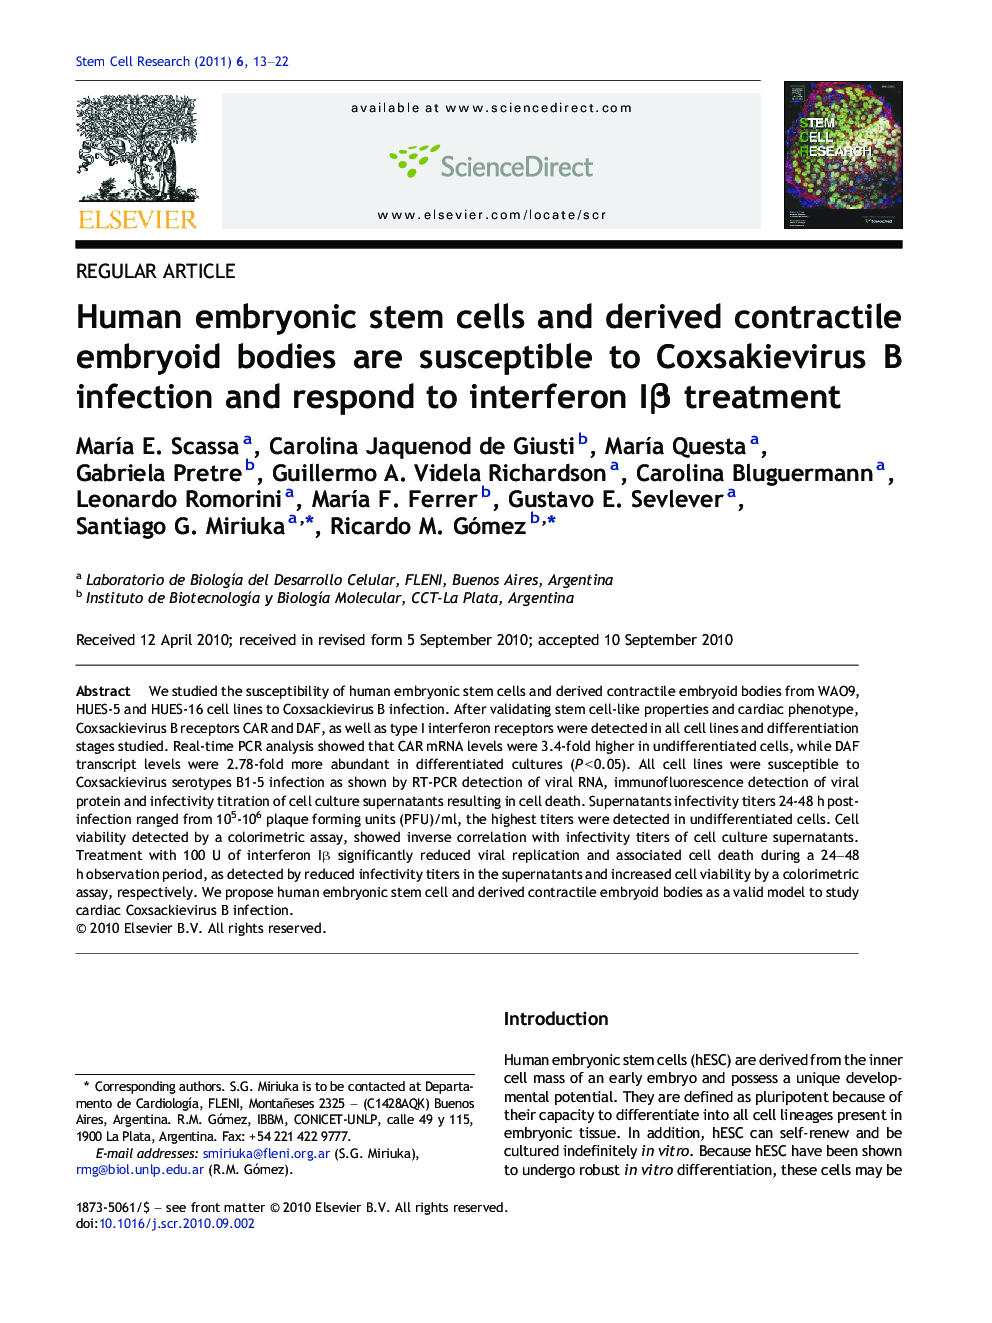 Human embryonic stem cells and derived contractile embryoid bodies are susceptible to Coxsakievirus B infection and respond to interferon IÎ² treatment